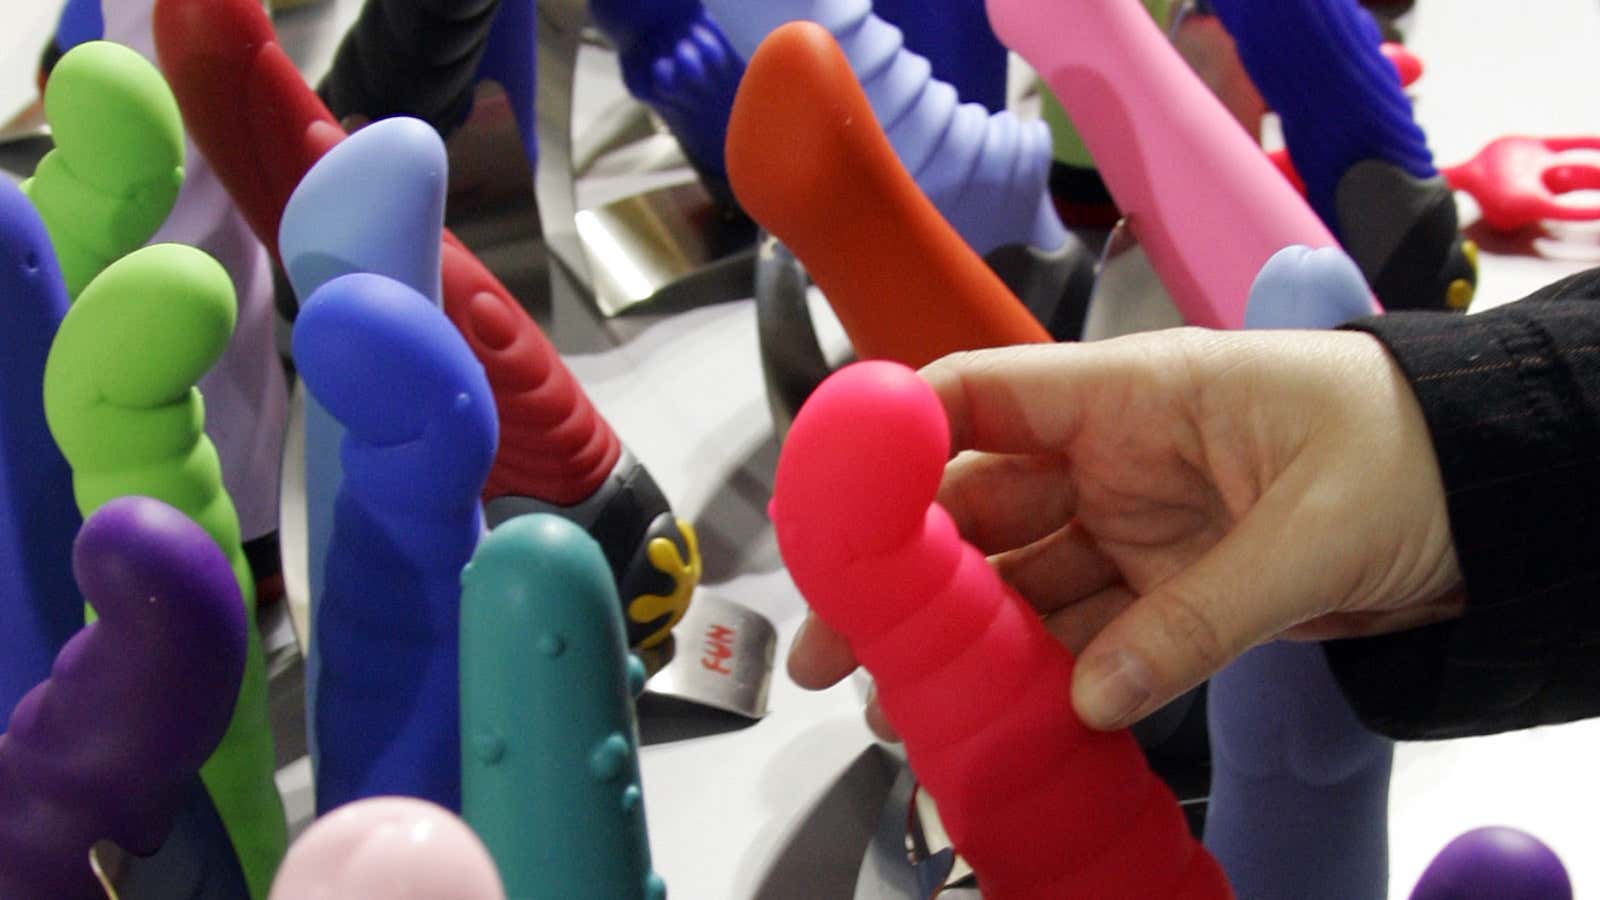 Dildos were actually pioneered by one of the worlds best ventriloquists